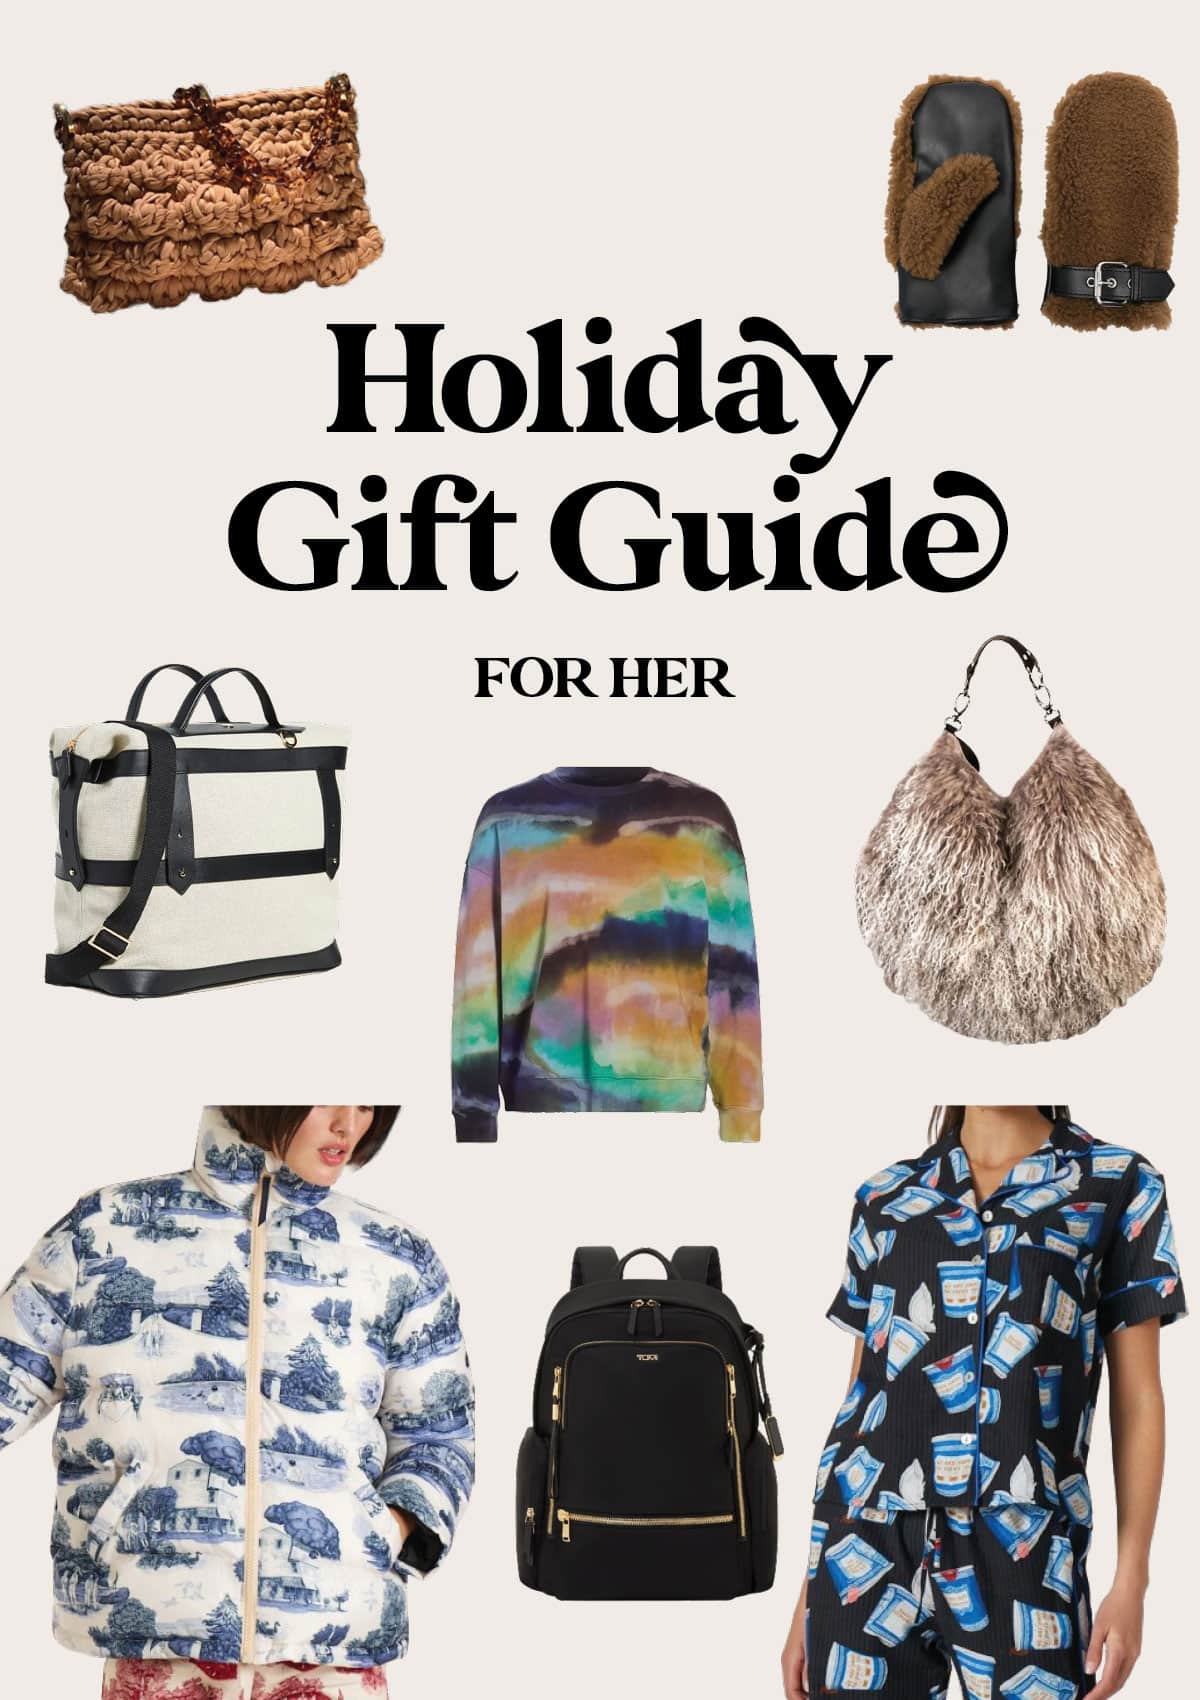 Best Gift Ideas For Women - Unique Fashion Favorites I searched the internet for the most unique fashion finds for her and rounded up the best gift ideas for women.